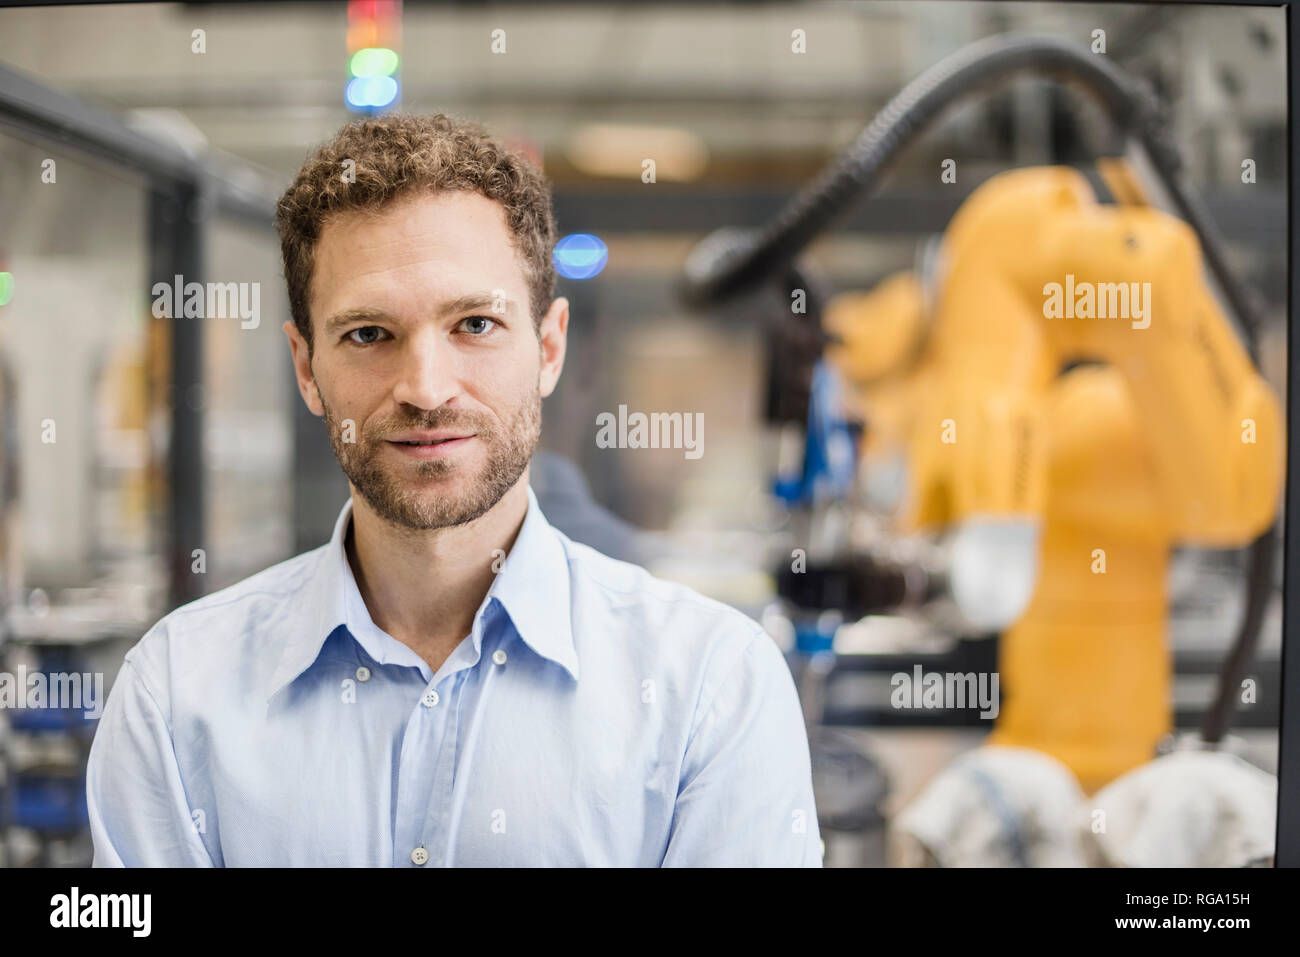 Businessman working in high tech company, portrait Banque D'Images